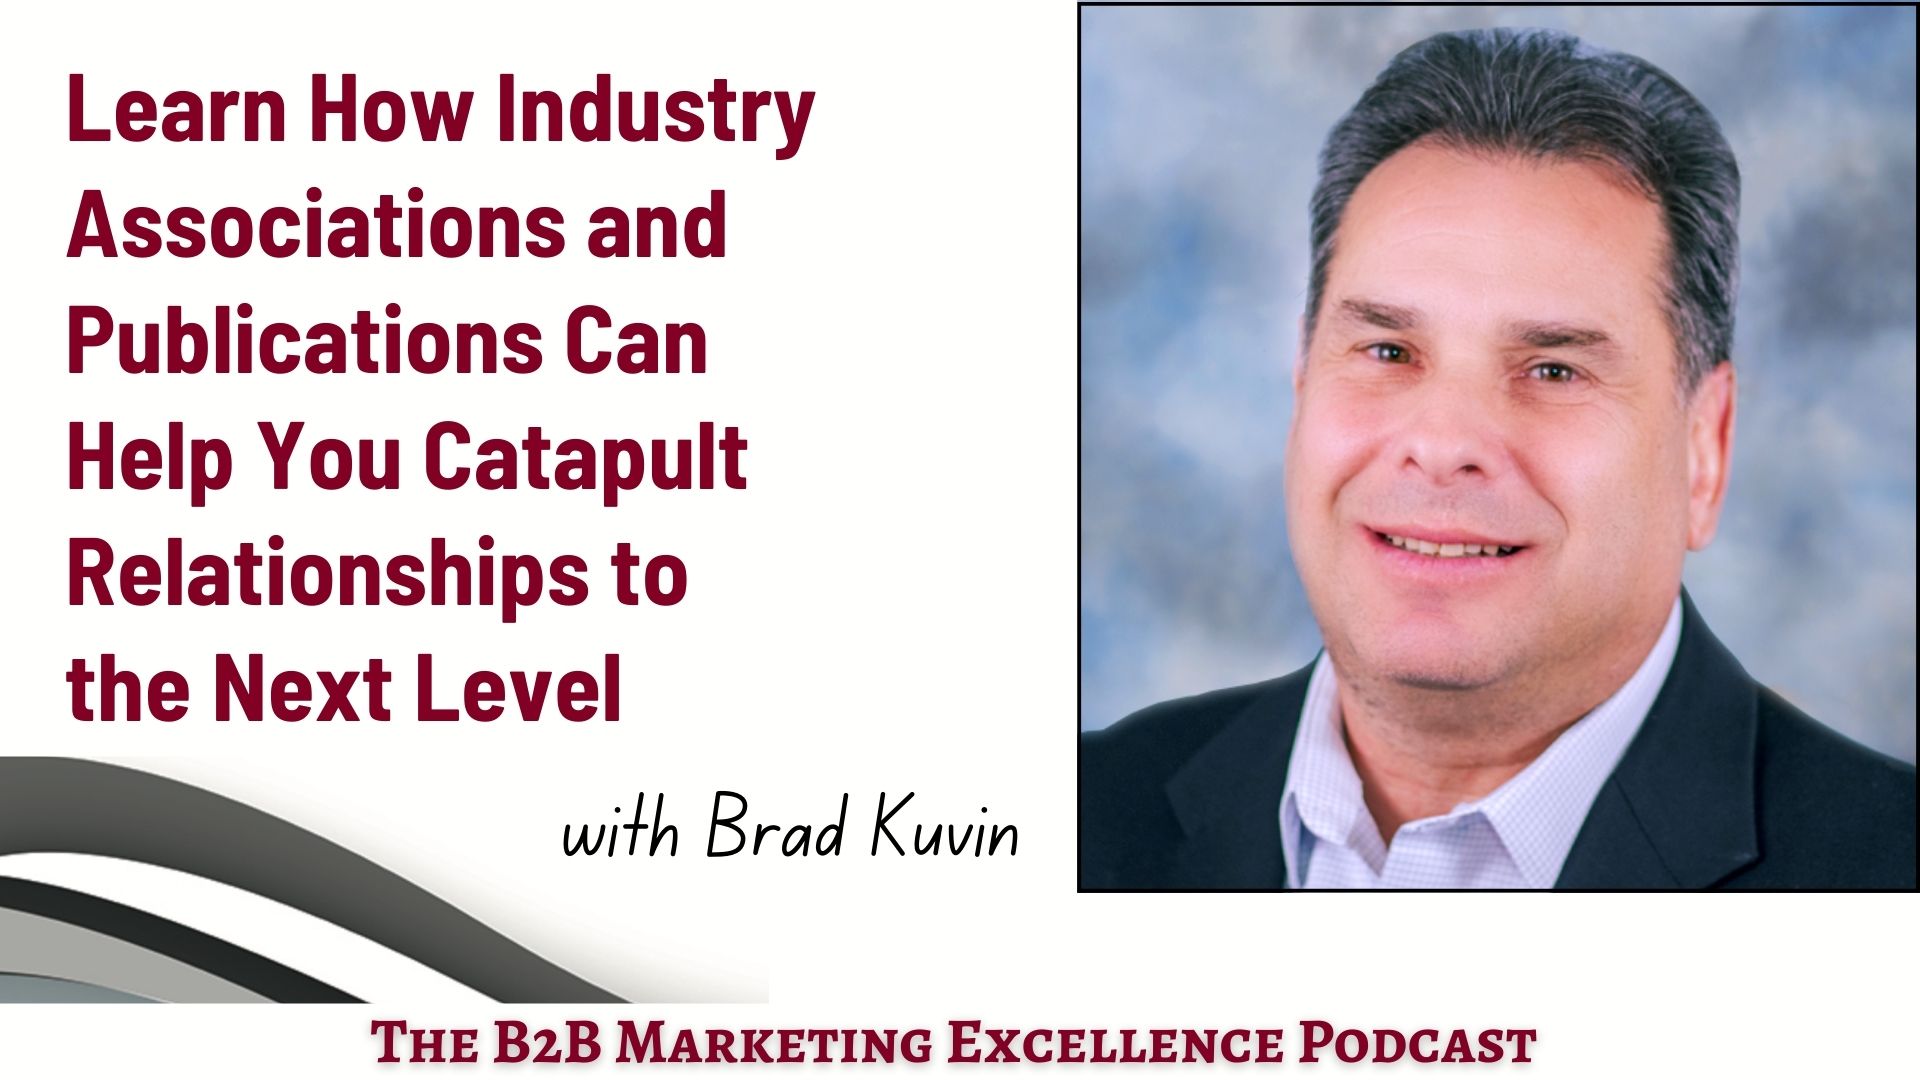 Podcast – Learn How Industry Associations and Publications Can Help You Catapult Relationships to the Next Level